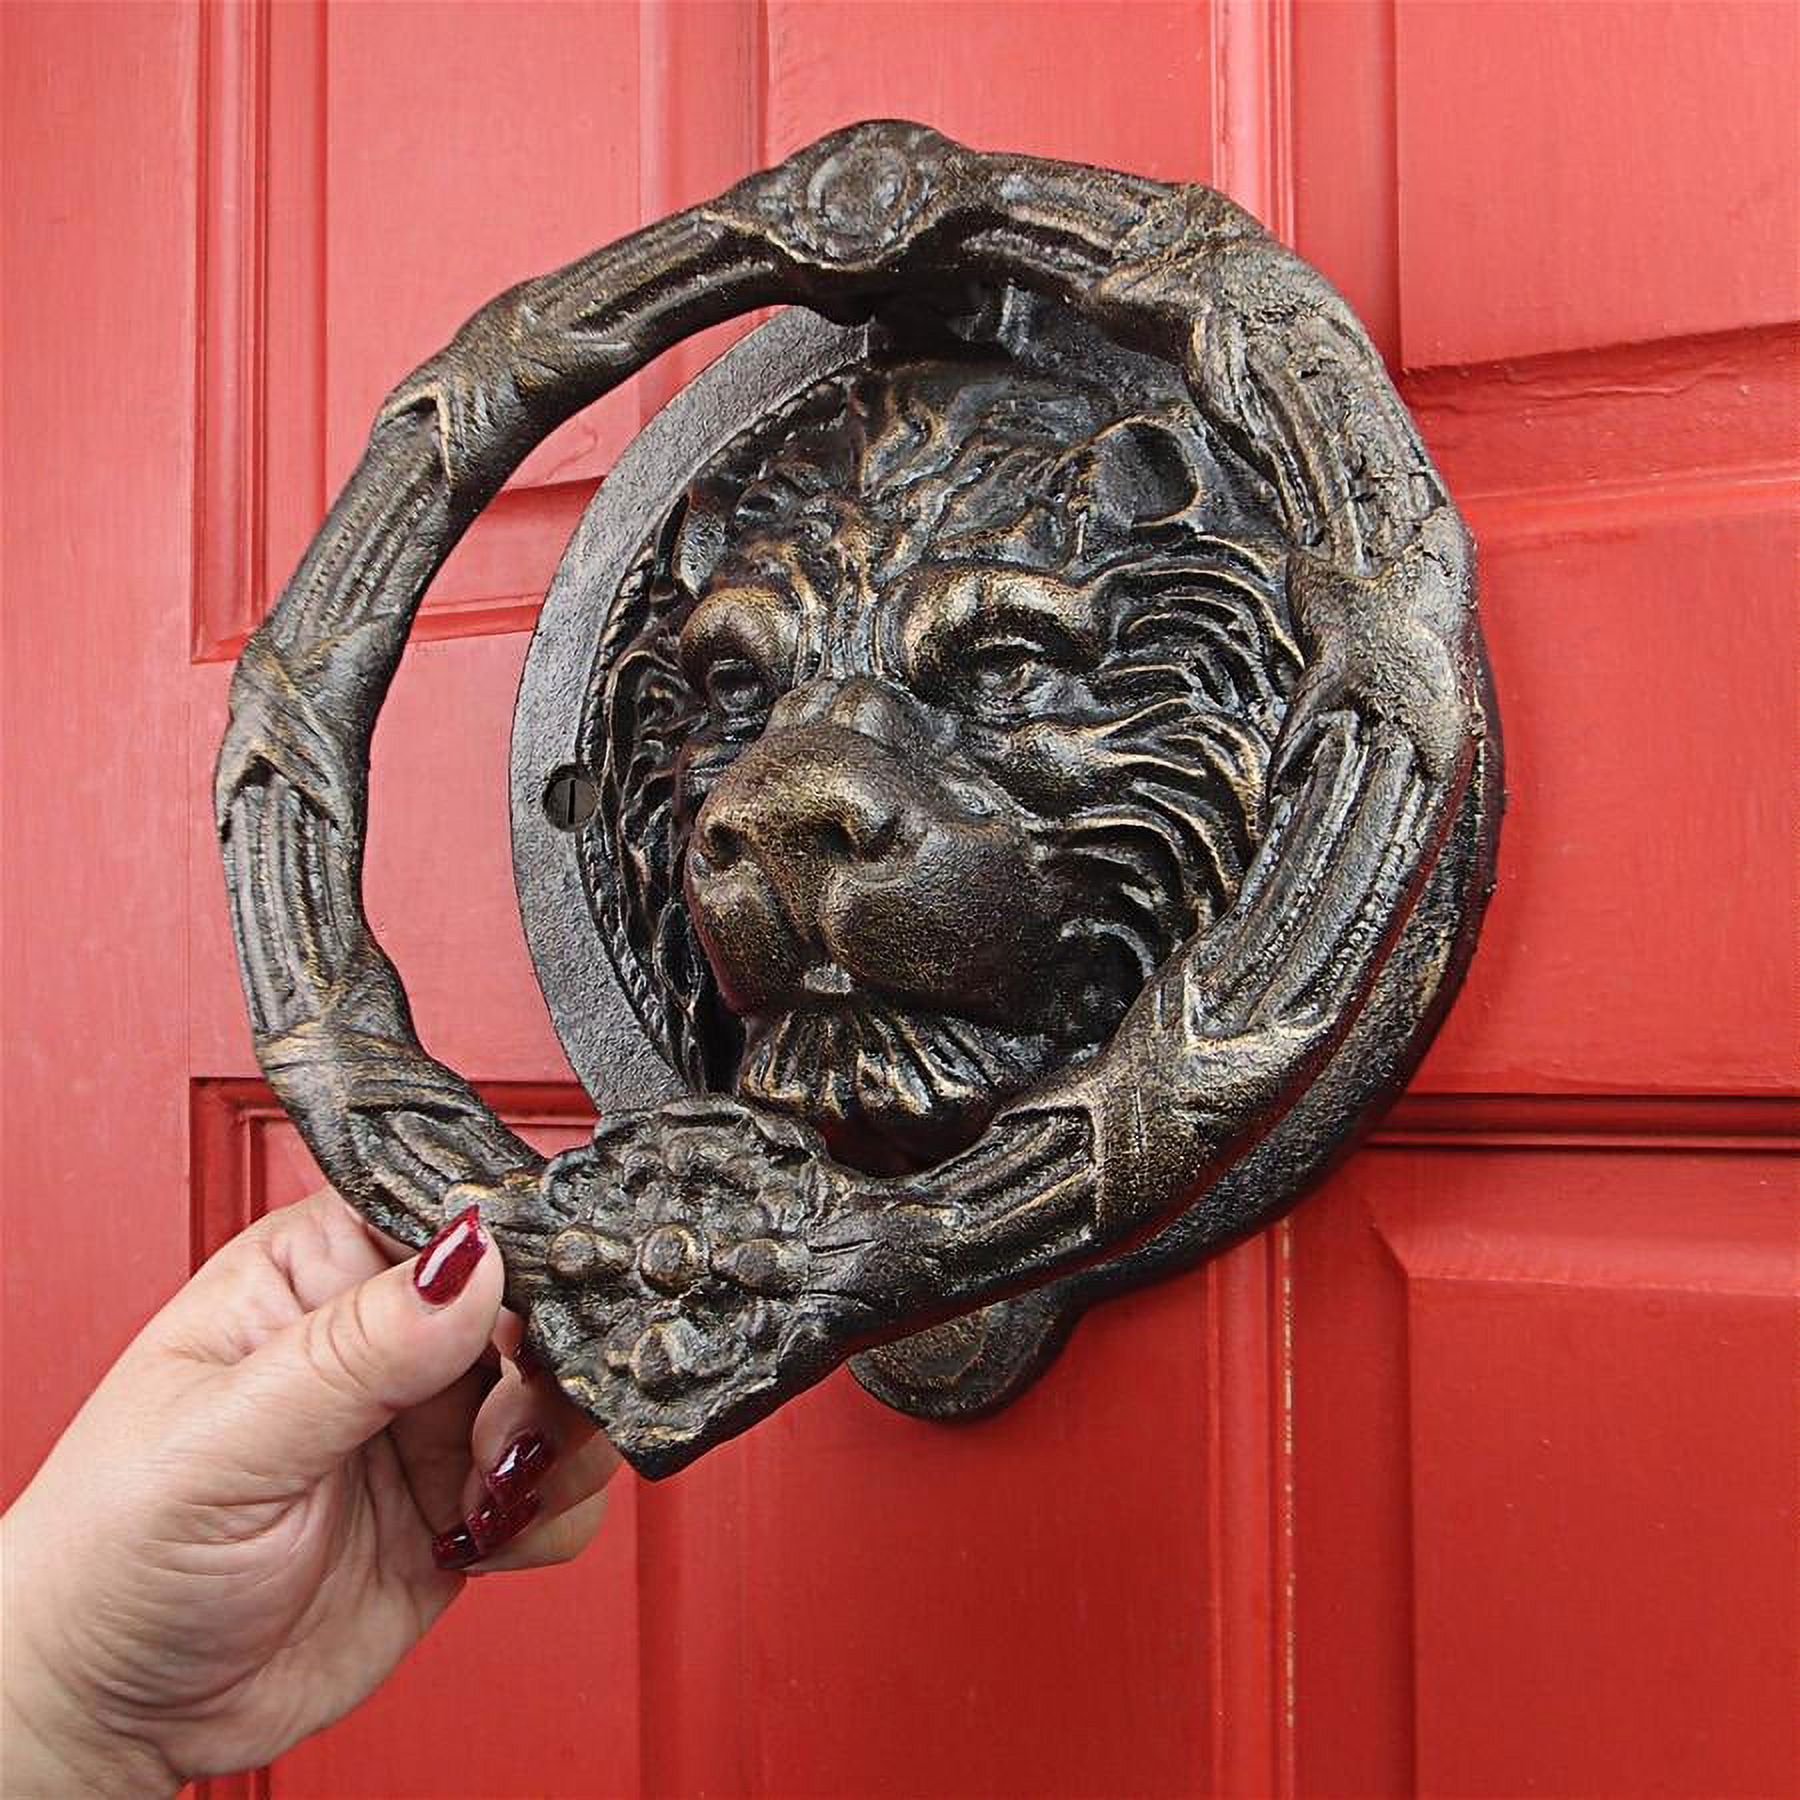 Design Toscano Pride of the Lions Foundry Cast Iron Lion Door Knocker - image 1 of 6